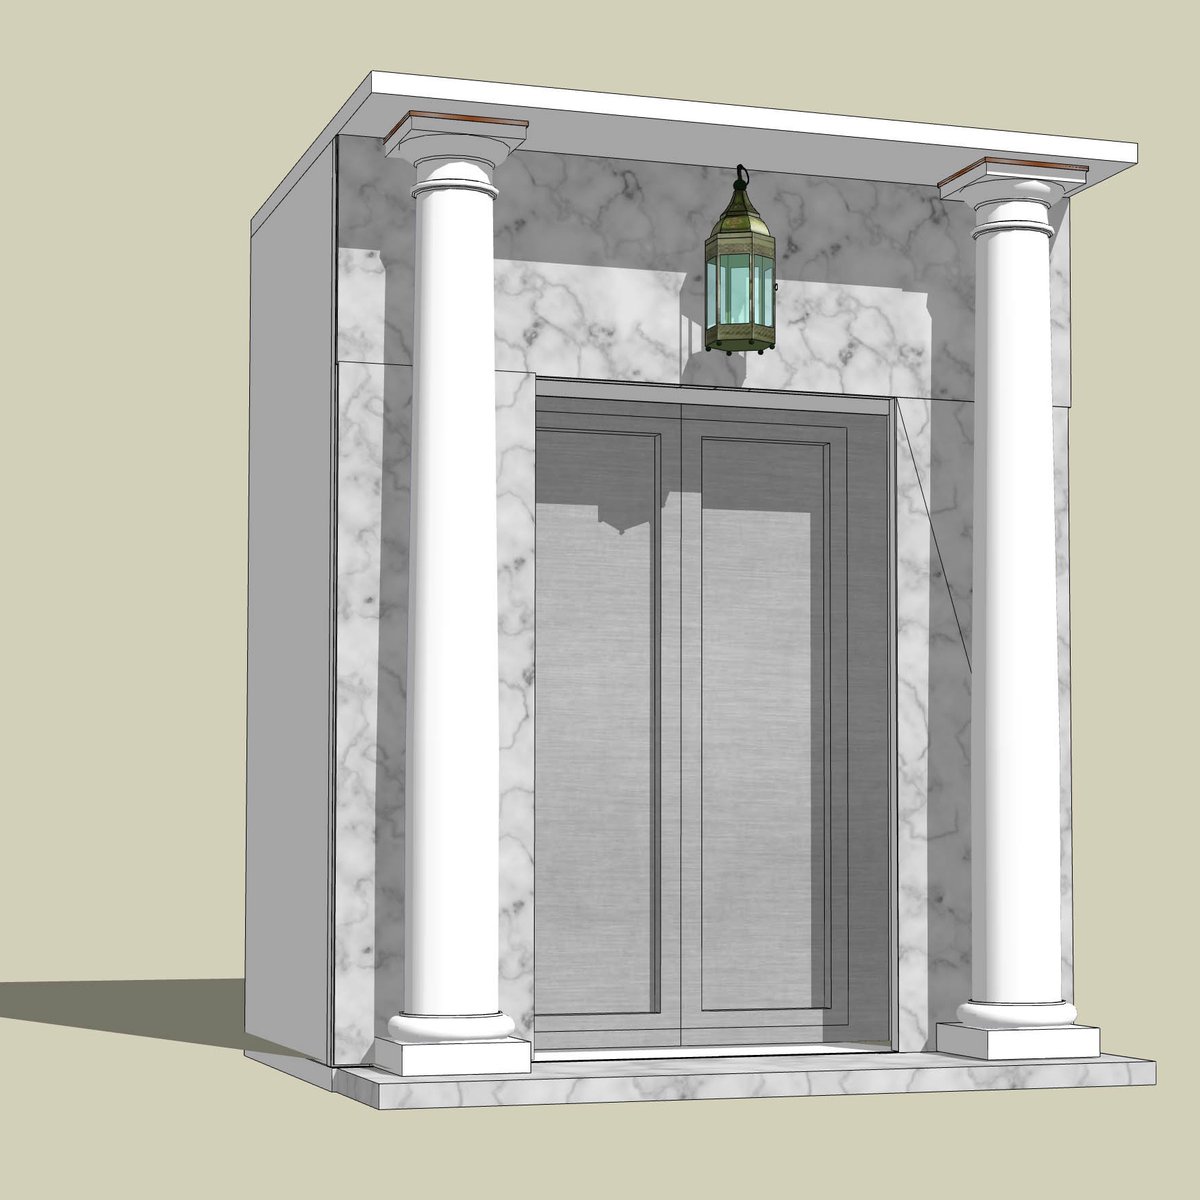 More Shadehaven haunt build work-in-progress, quite literally in this image: design proceeds on the first of two crypts I'm building, though the roof isn't on this one yet. Turned on some shadow effects and a marble texture to spice it up.

#Halloween #haunted #yardhaunt #crypt